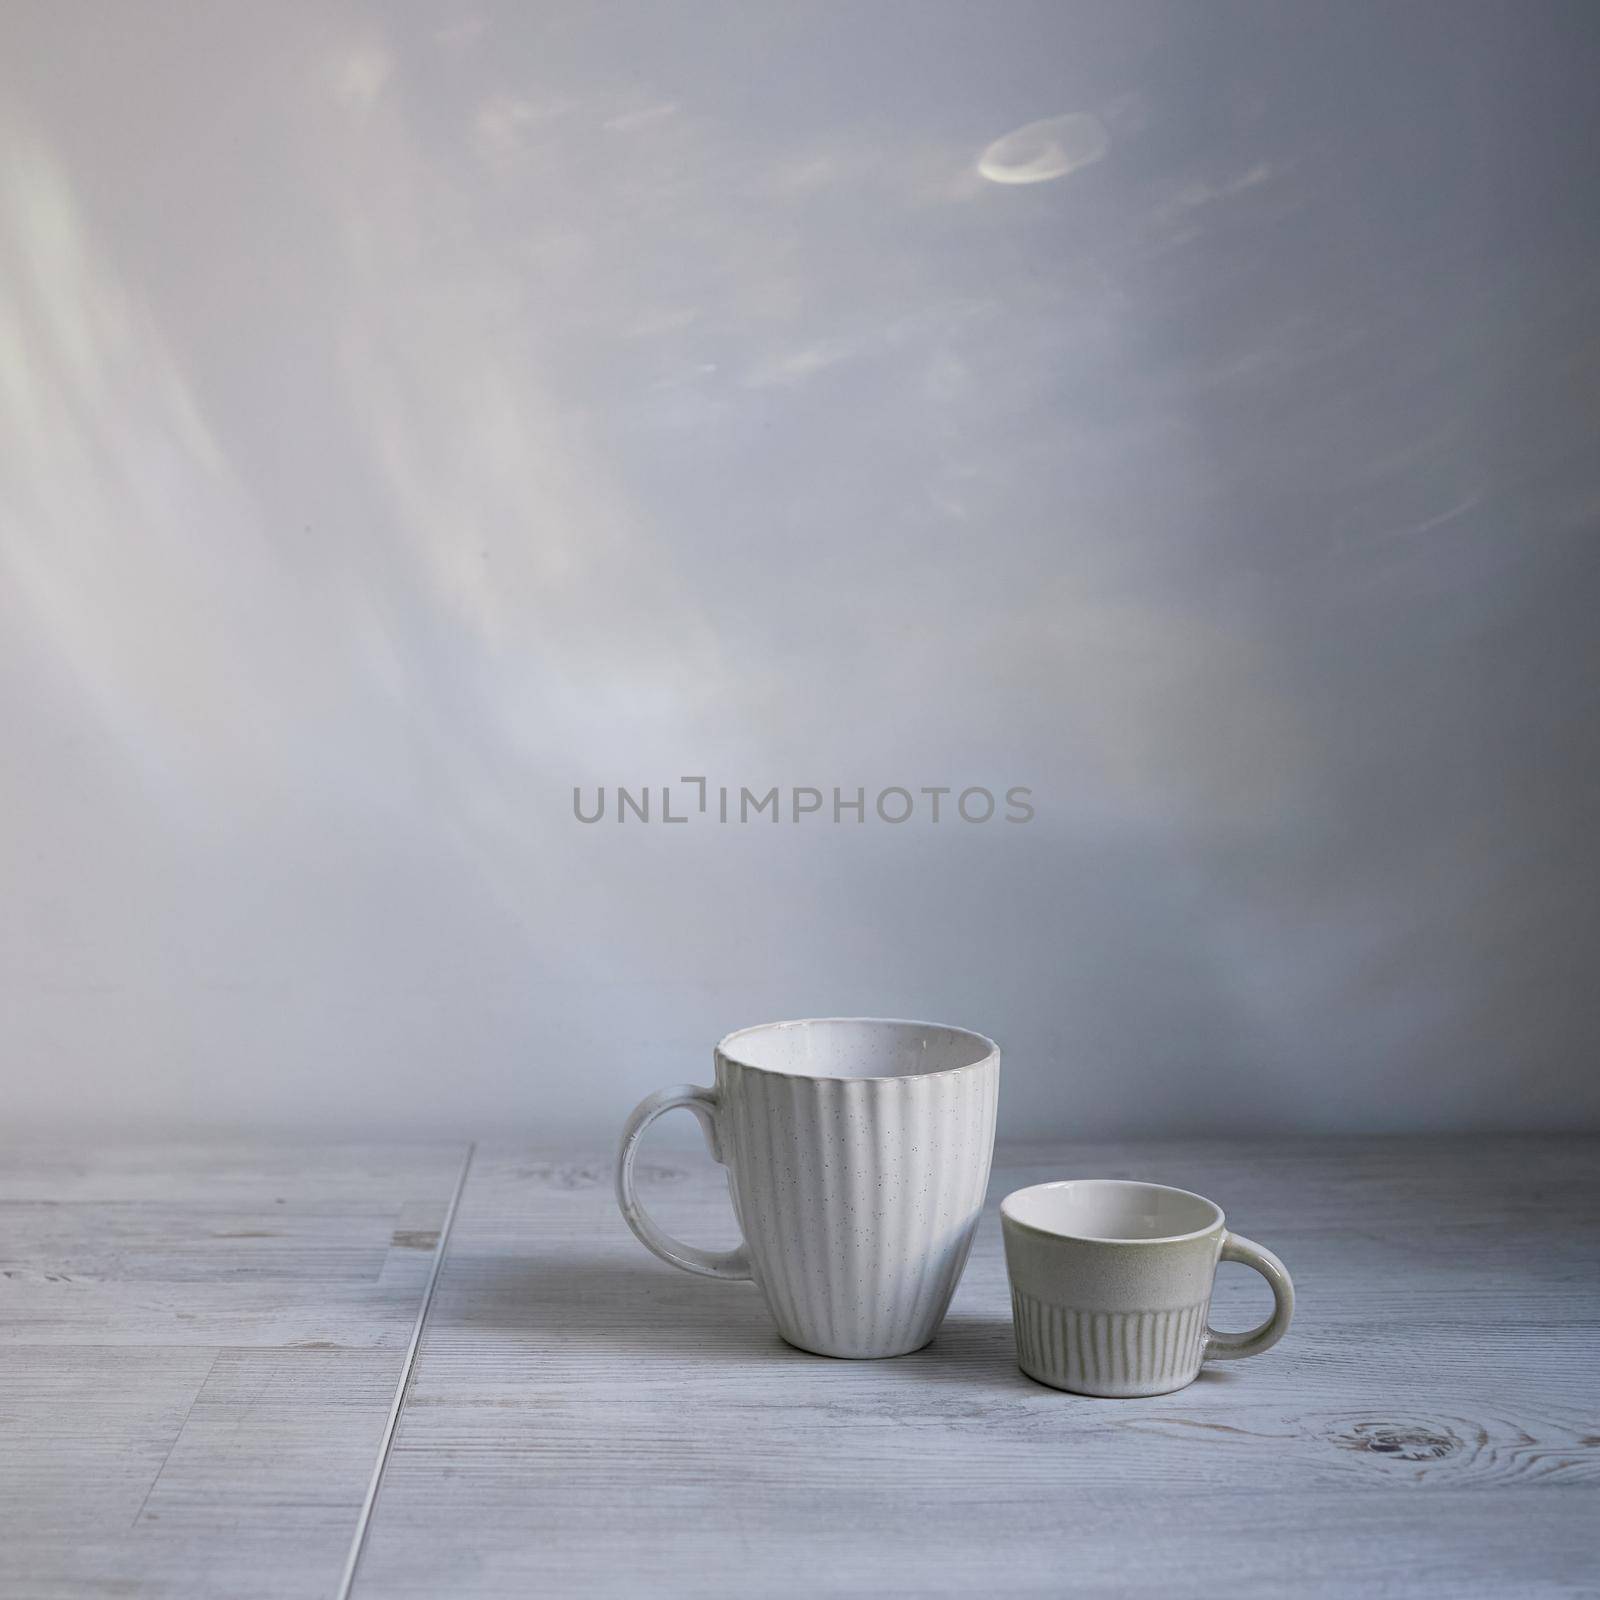 Minimalistic Scandinavian style. Two cups of coffee or tea of different sizes for two on on the table. by elenarostunova